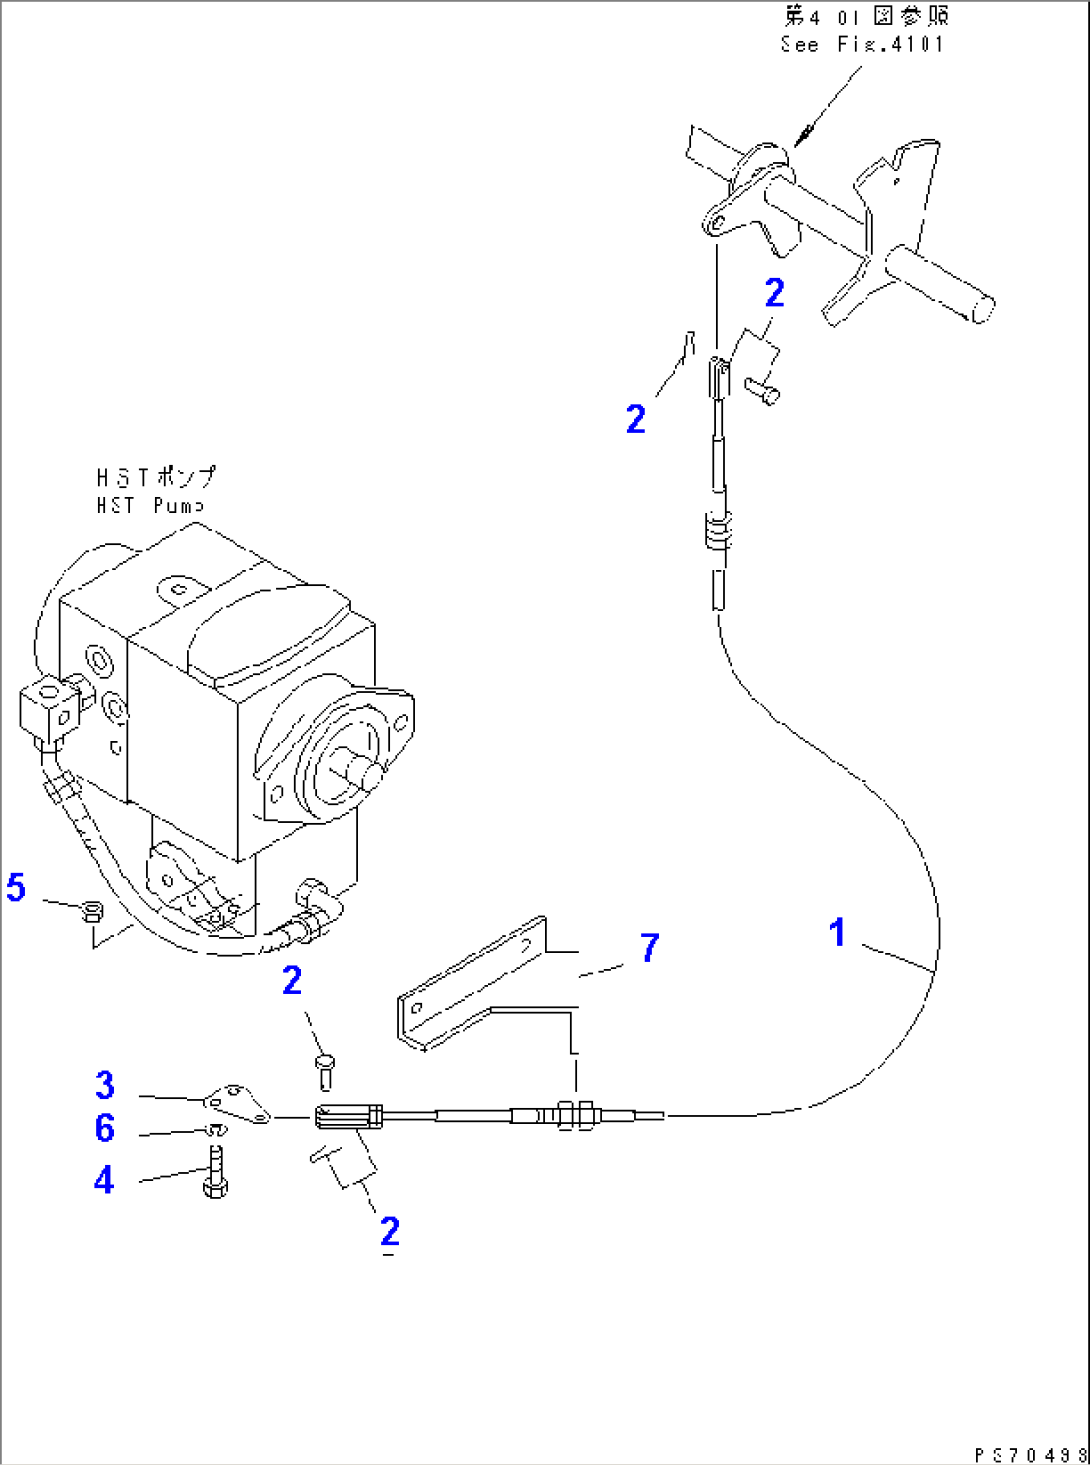 HIGH AND LOW SPEED CONTROL LINKAGE